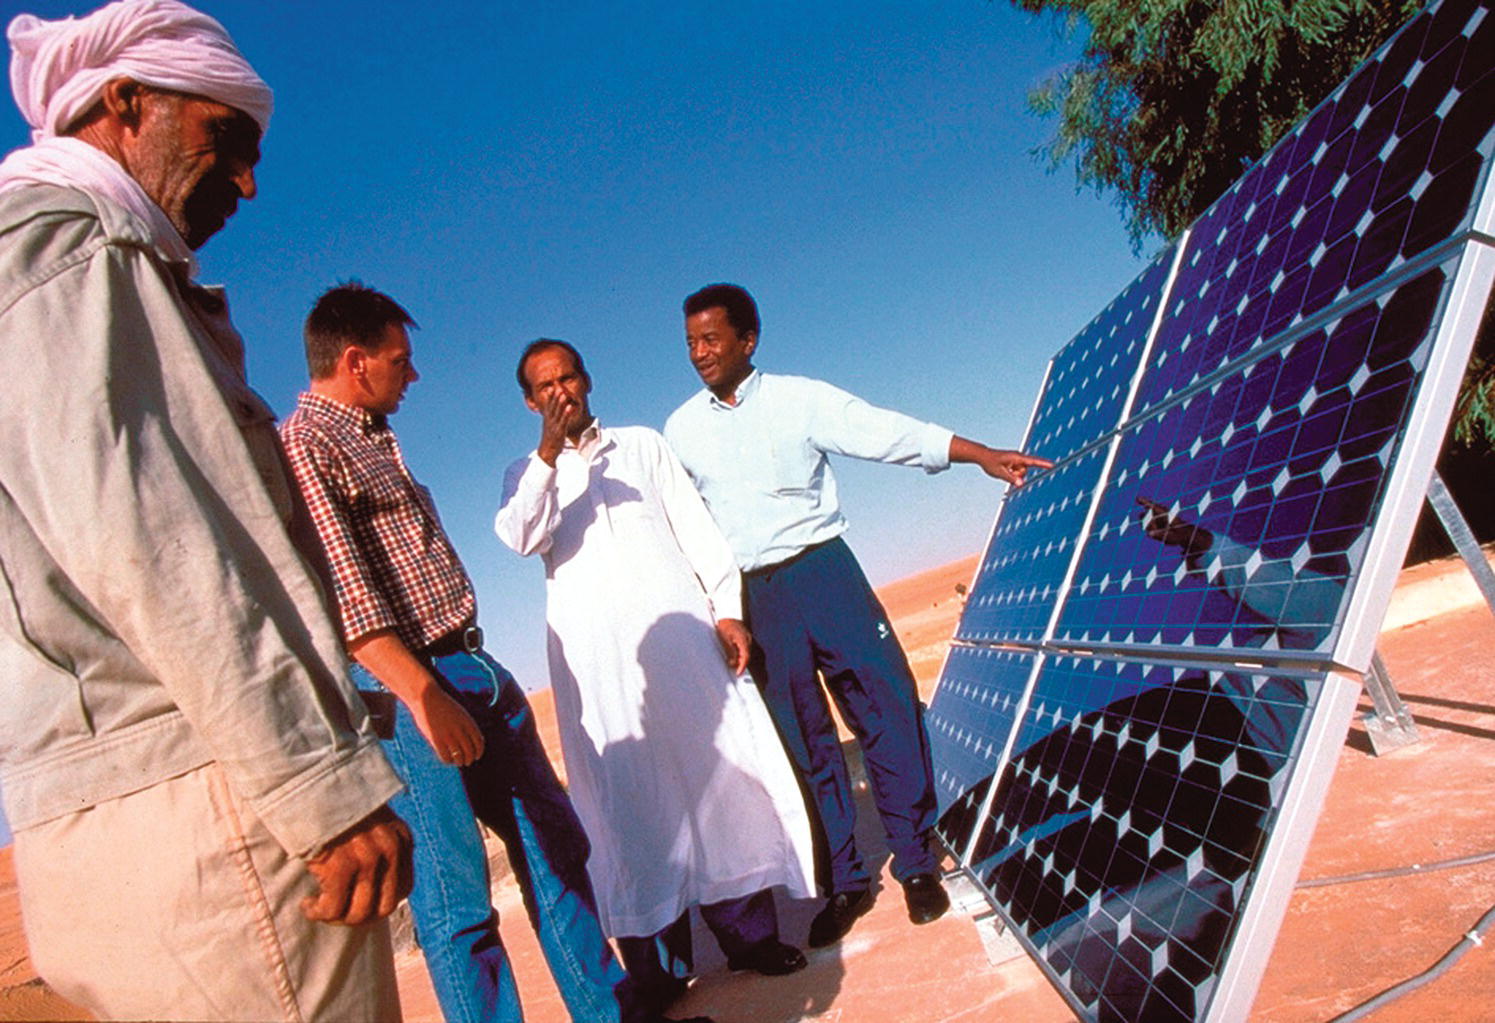 A group of men standing in front of the solar panel.